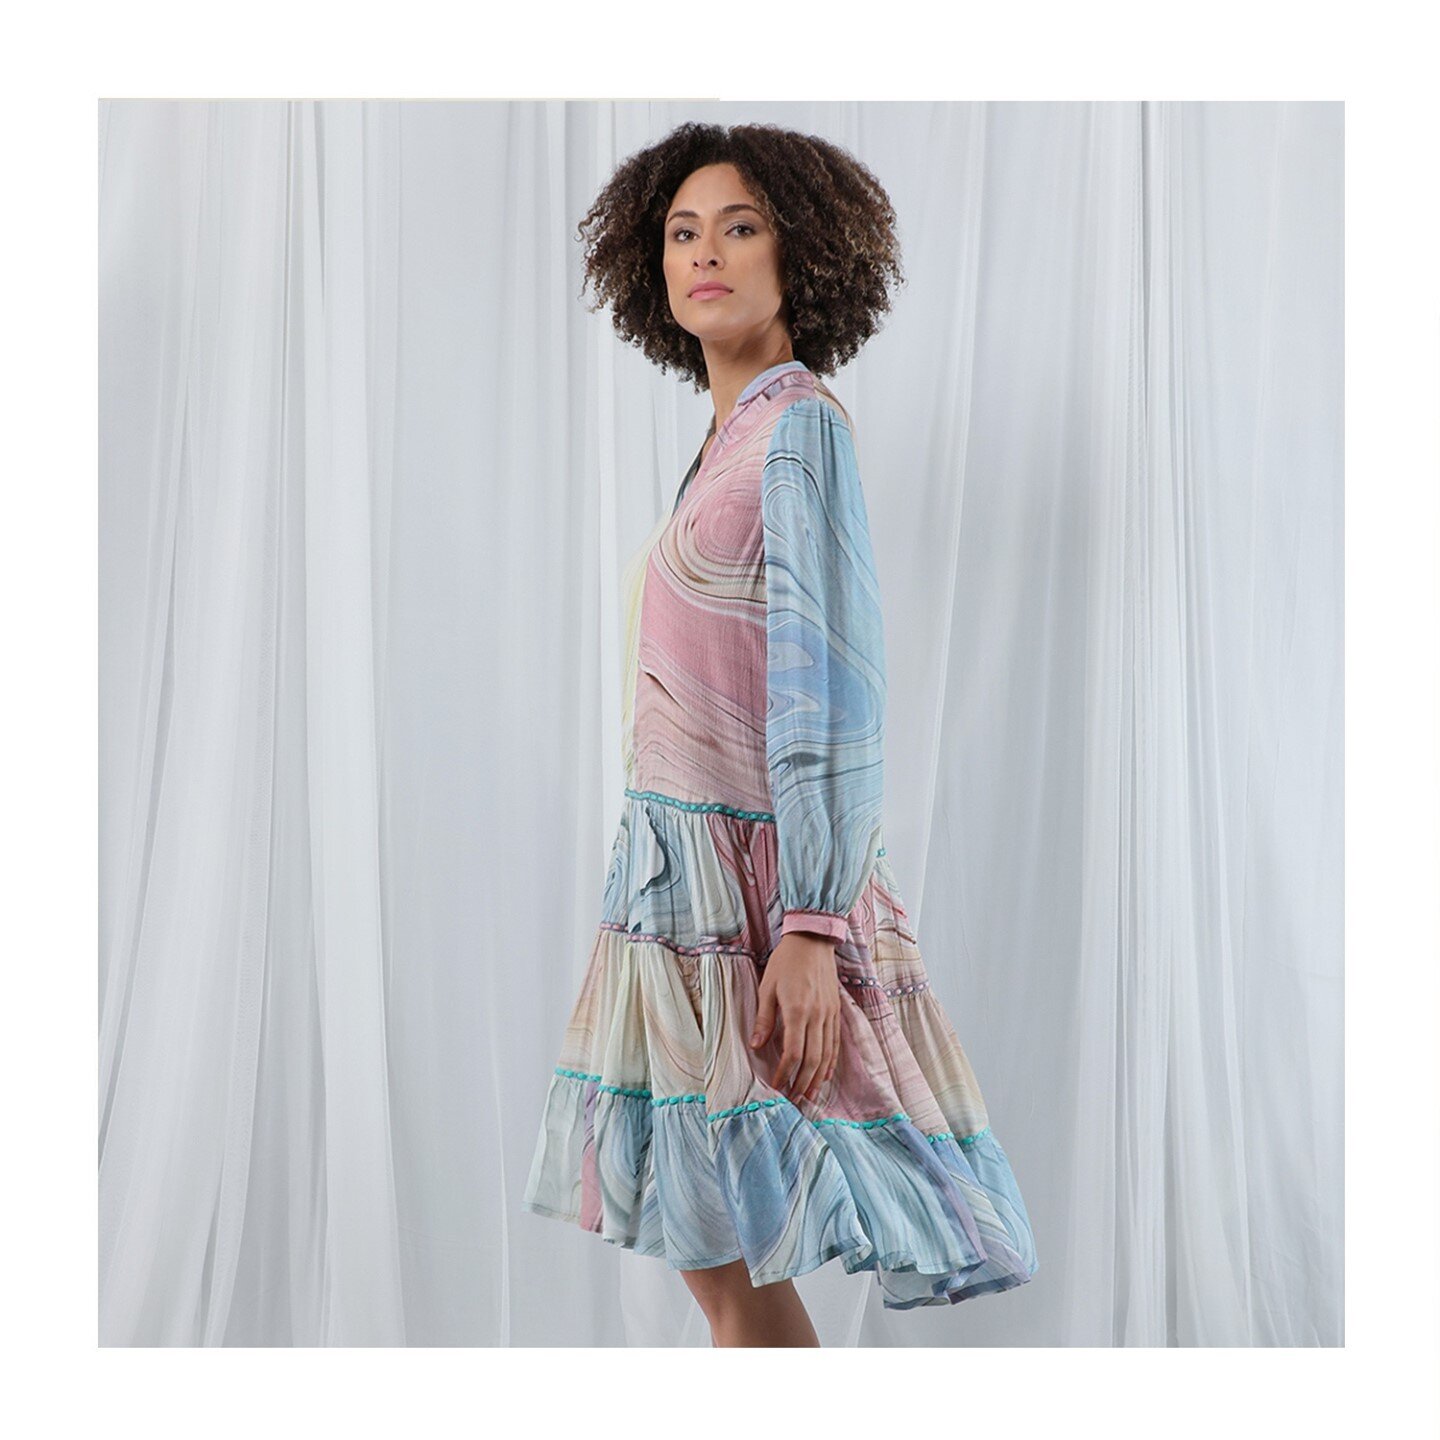 Enjoy summer with this playful piece, hand crafted details such as interlacement between tiers adds a touch of bohoness that perfectly complements the pastel shades. Time to leave behind doom and gloom and step into the sunshine.⁠
#bl_nk_london⁠⁠
.⁠⁠